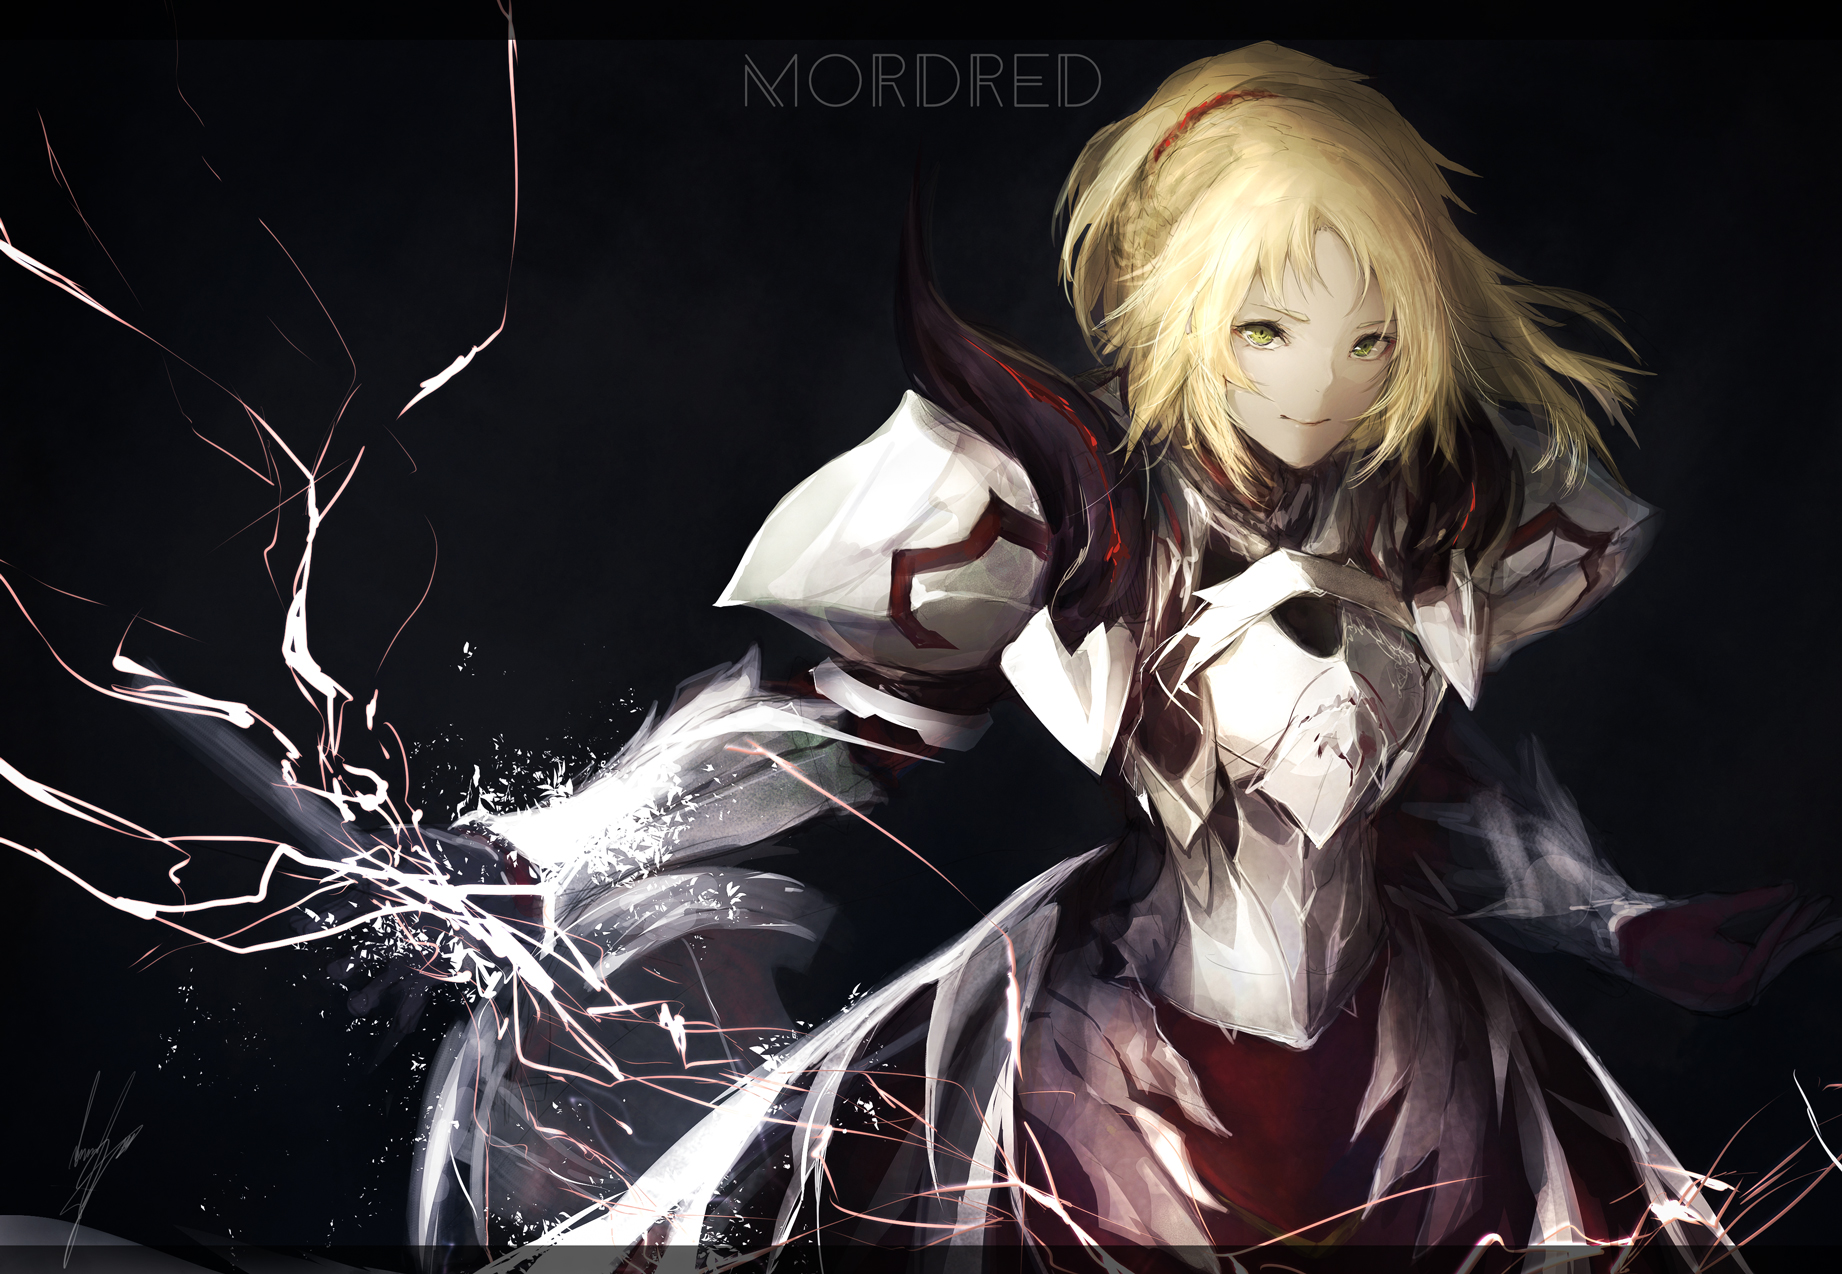 Mordred Fate Apocrypha Saber Of Red Fate Apocrypha 1842x1274